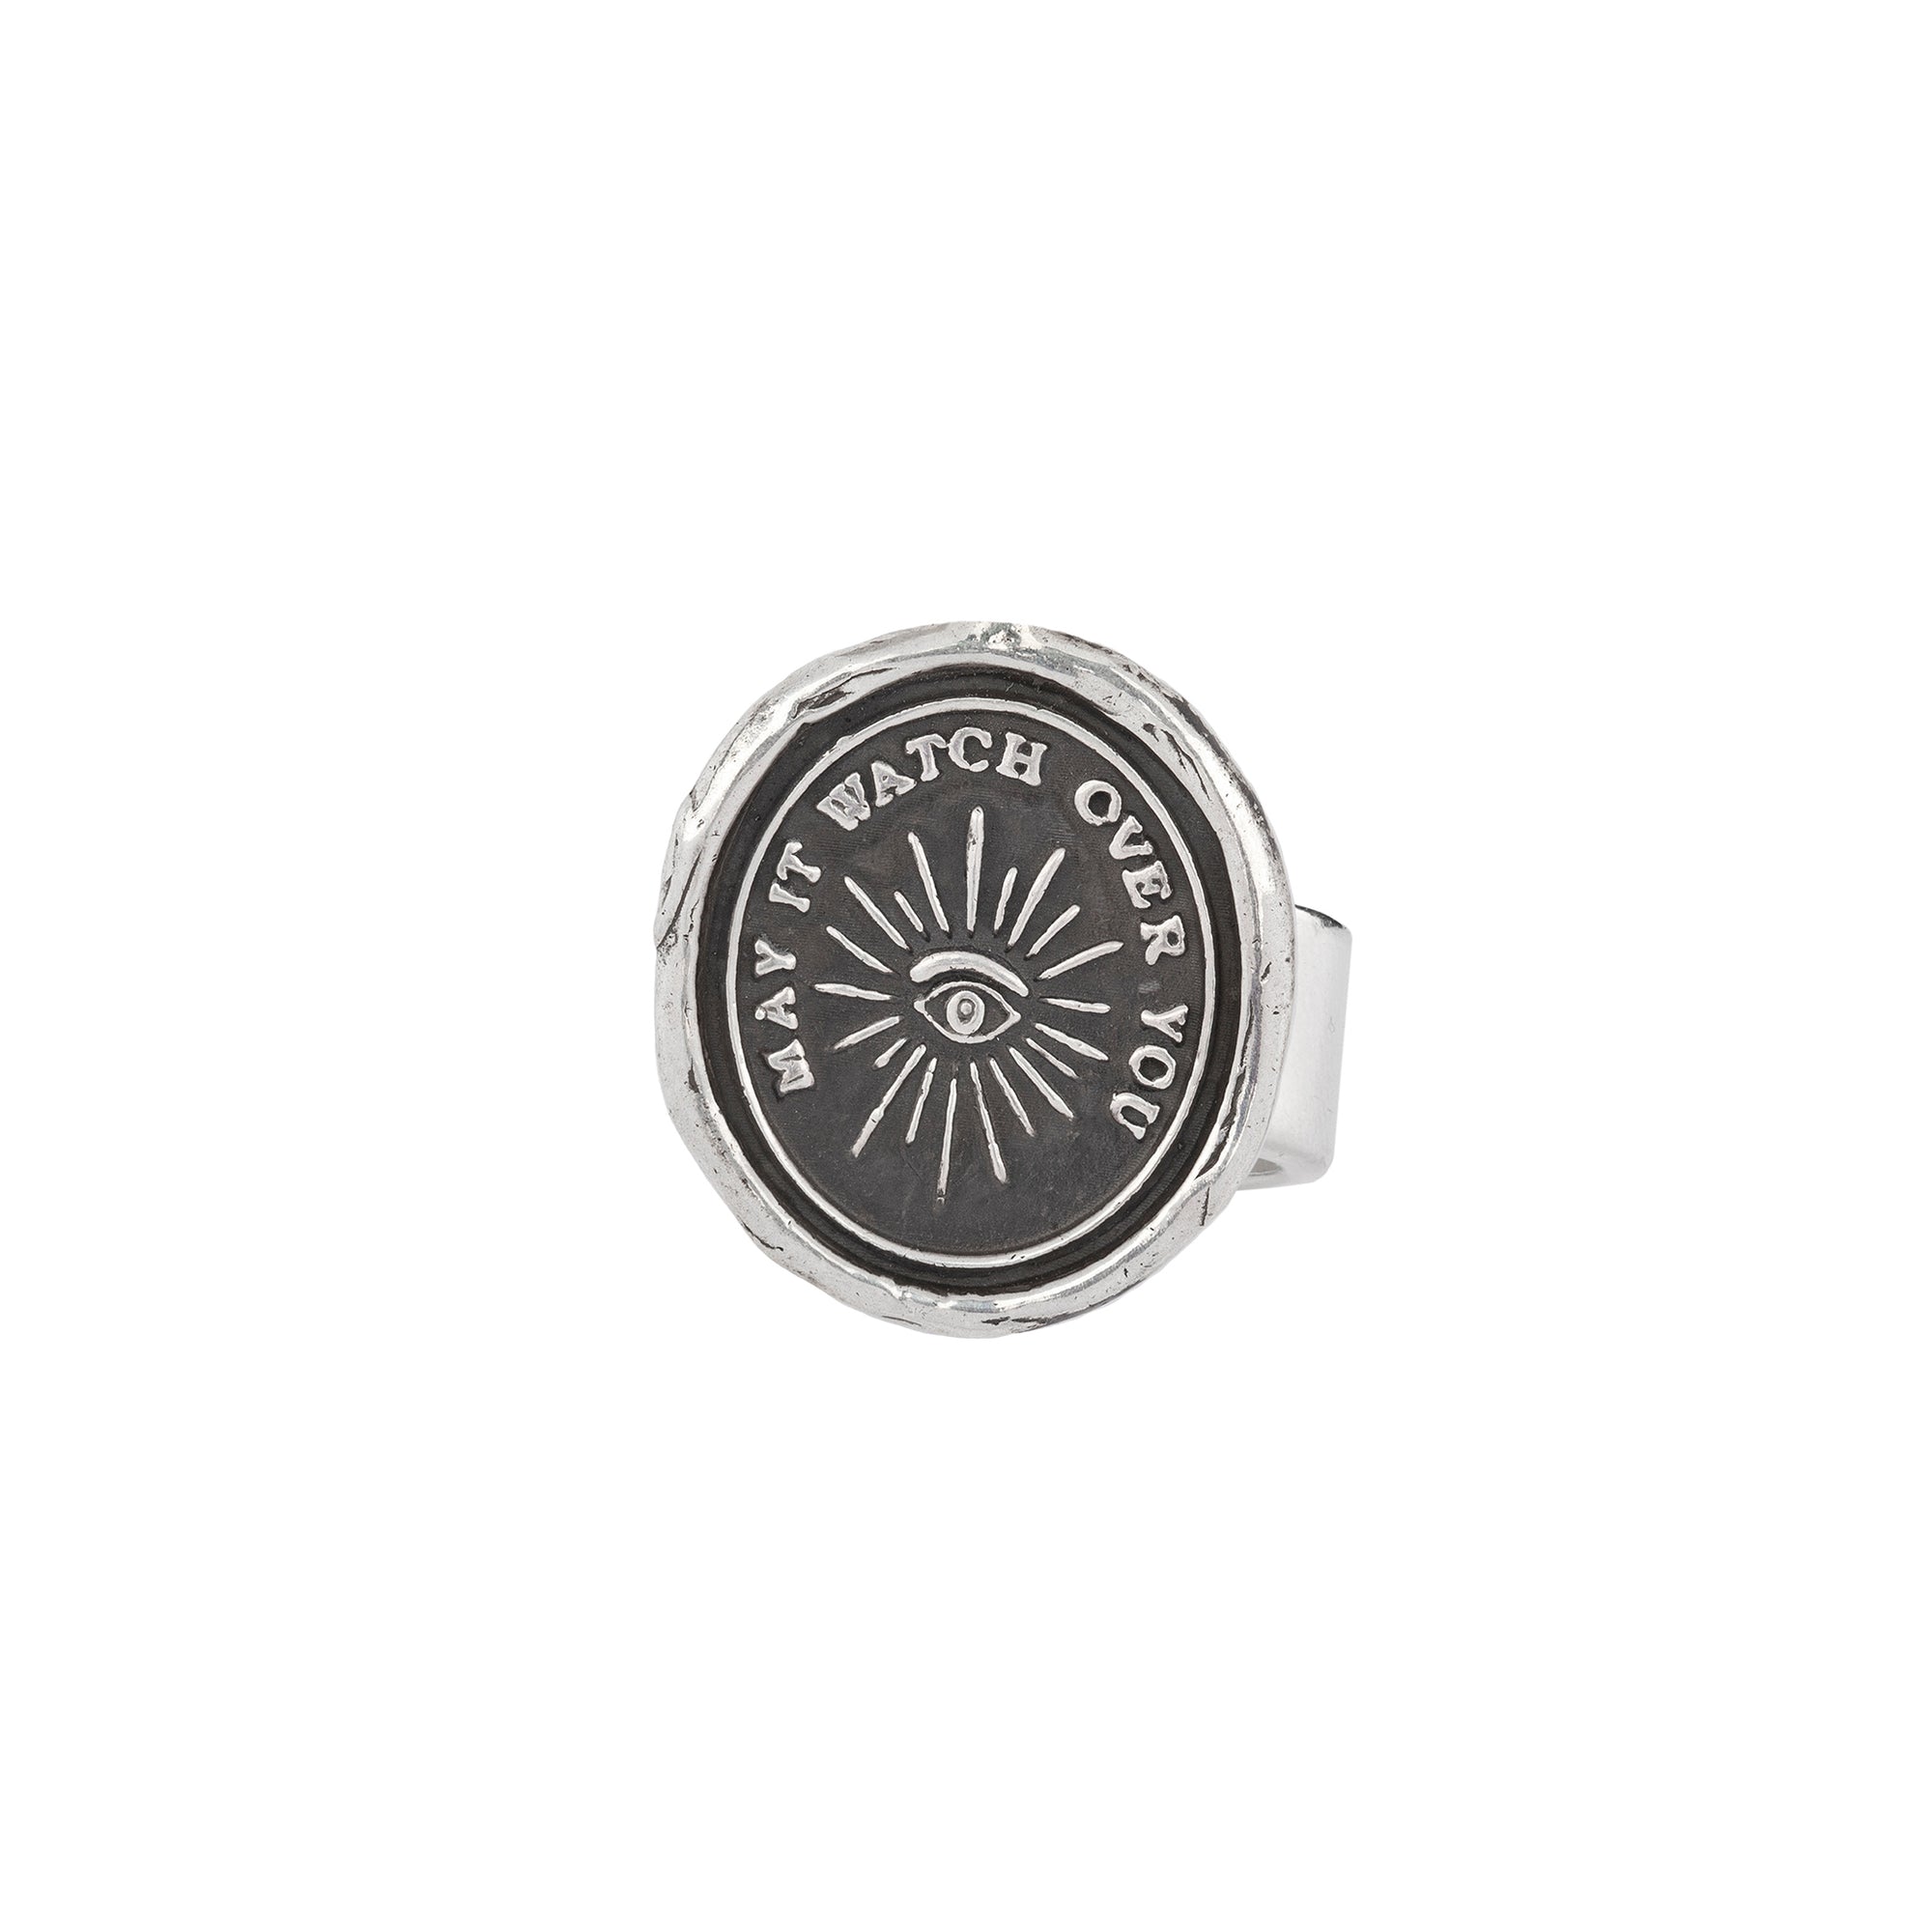 A sterling silver ring with our Higher Power talisman on the band.